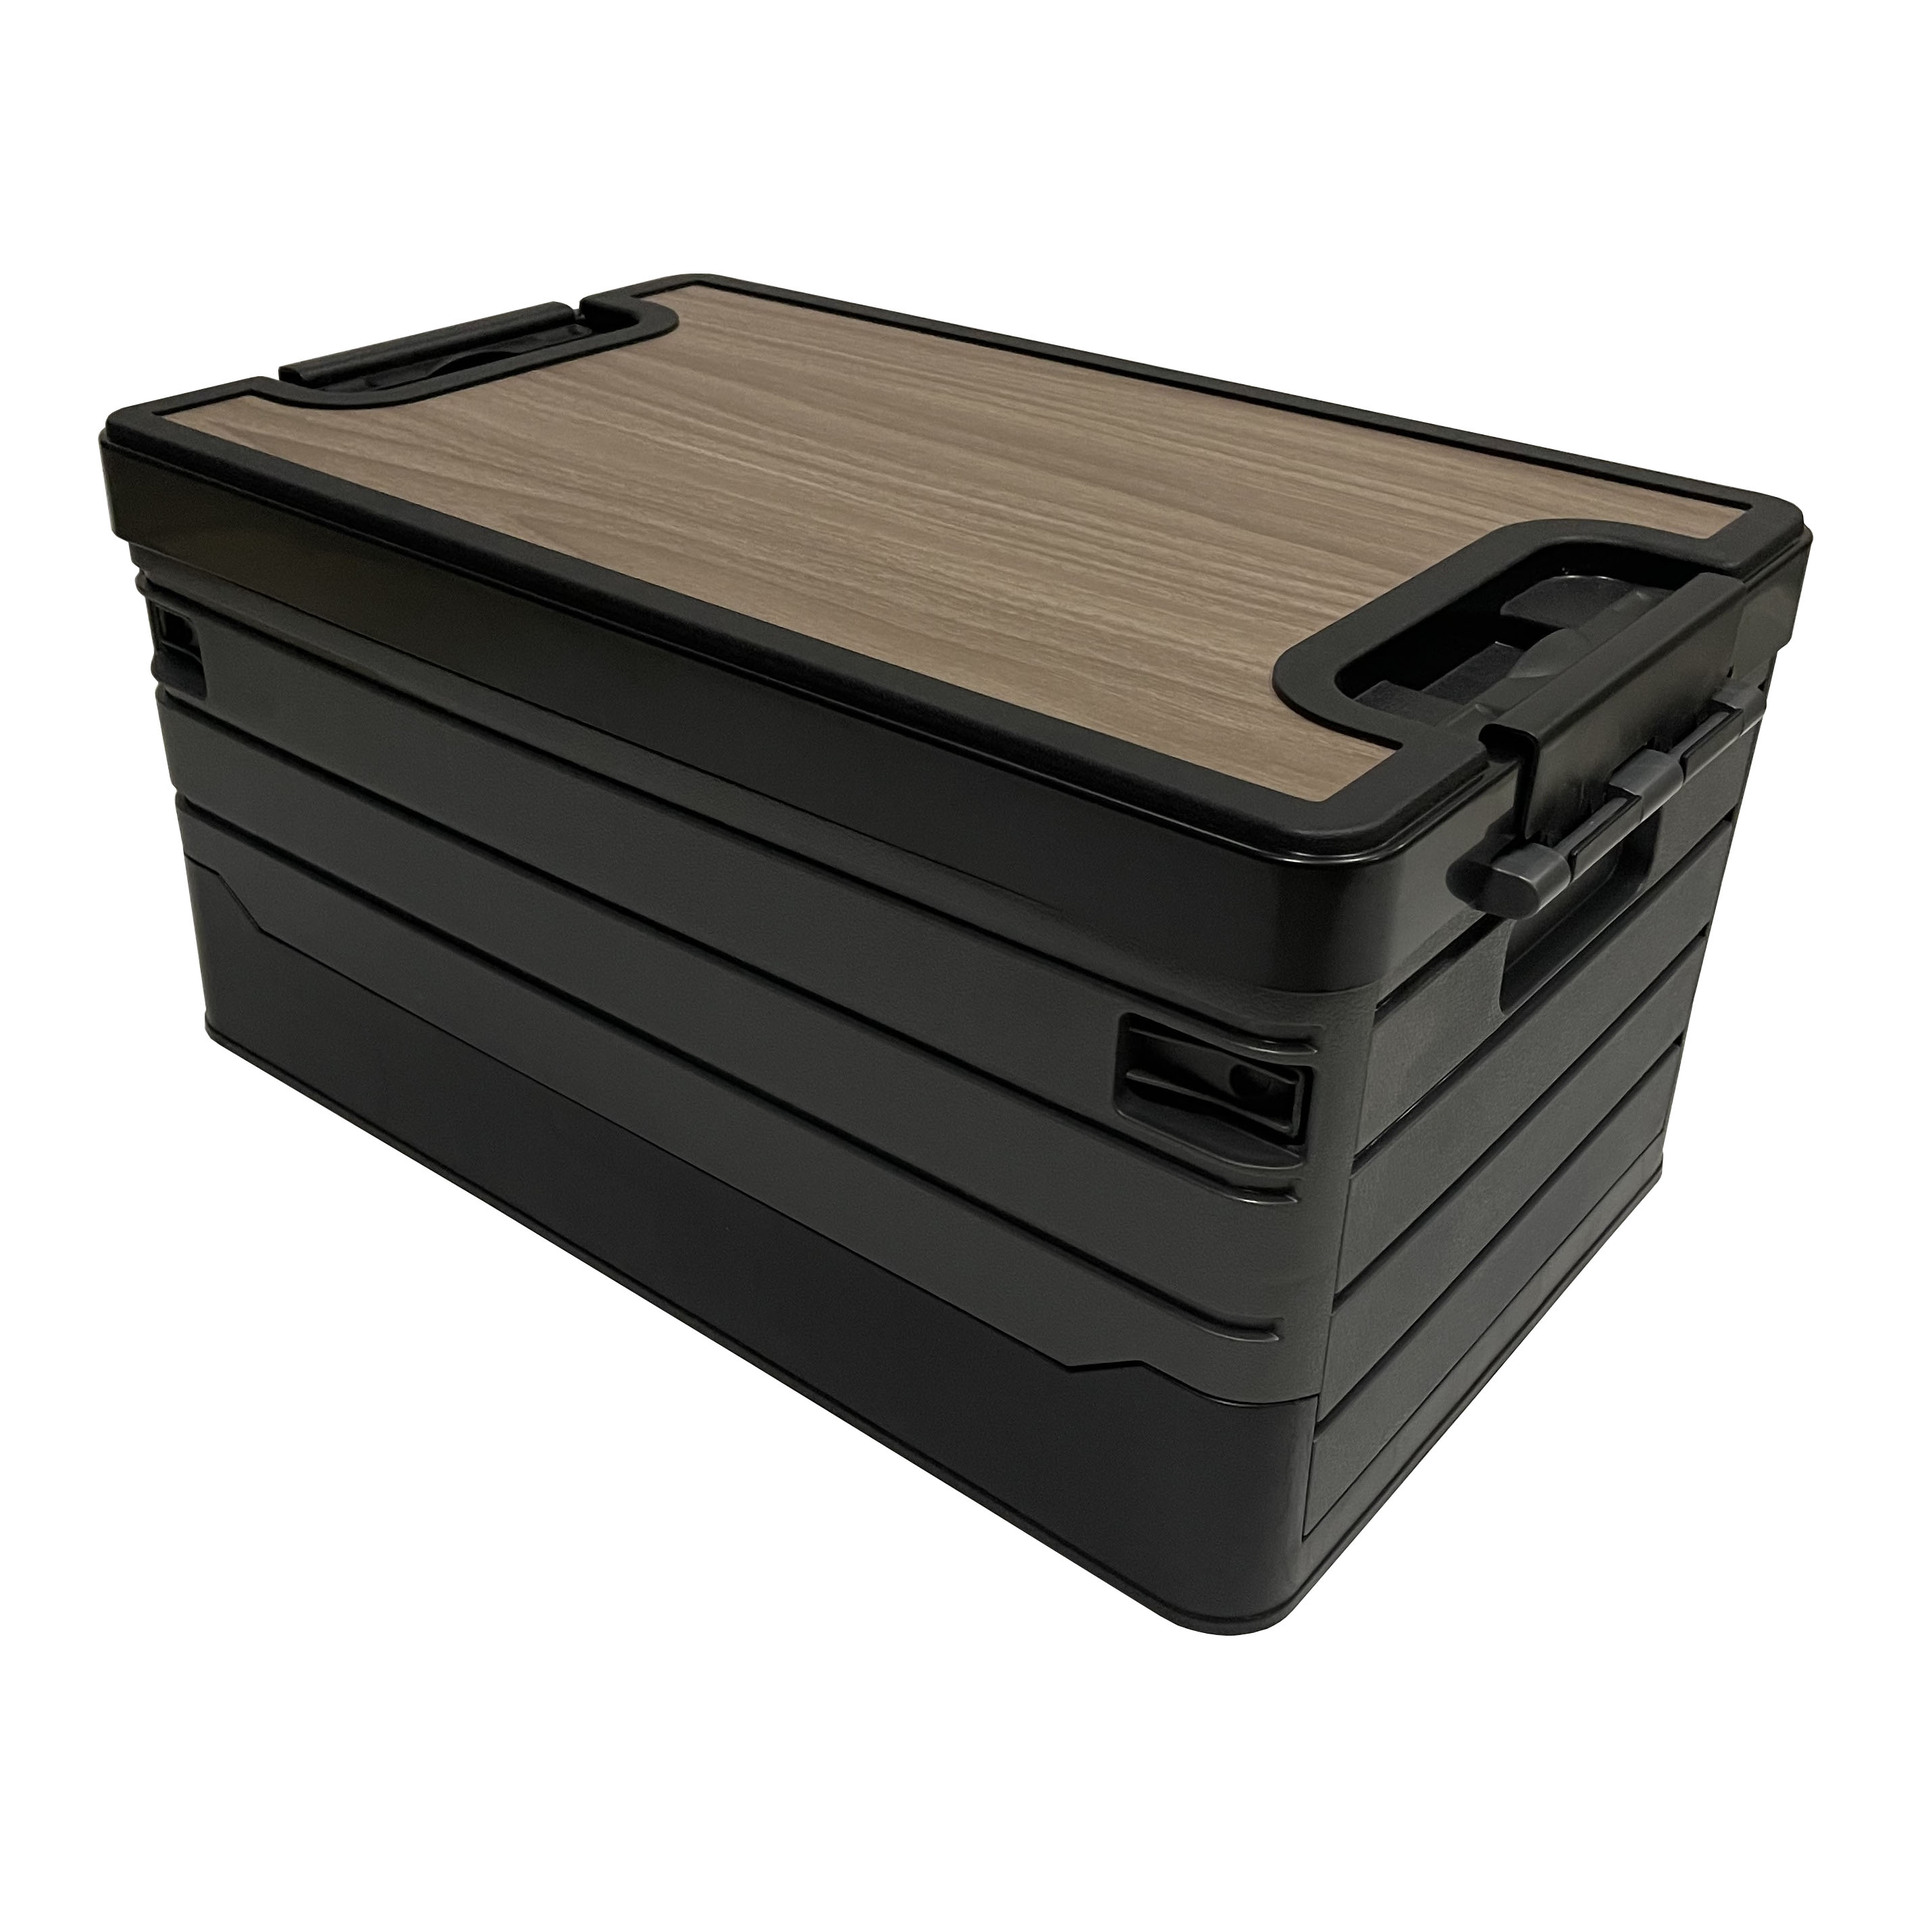 Outdoor Portable Camping Foldable Box With Wood Cover